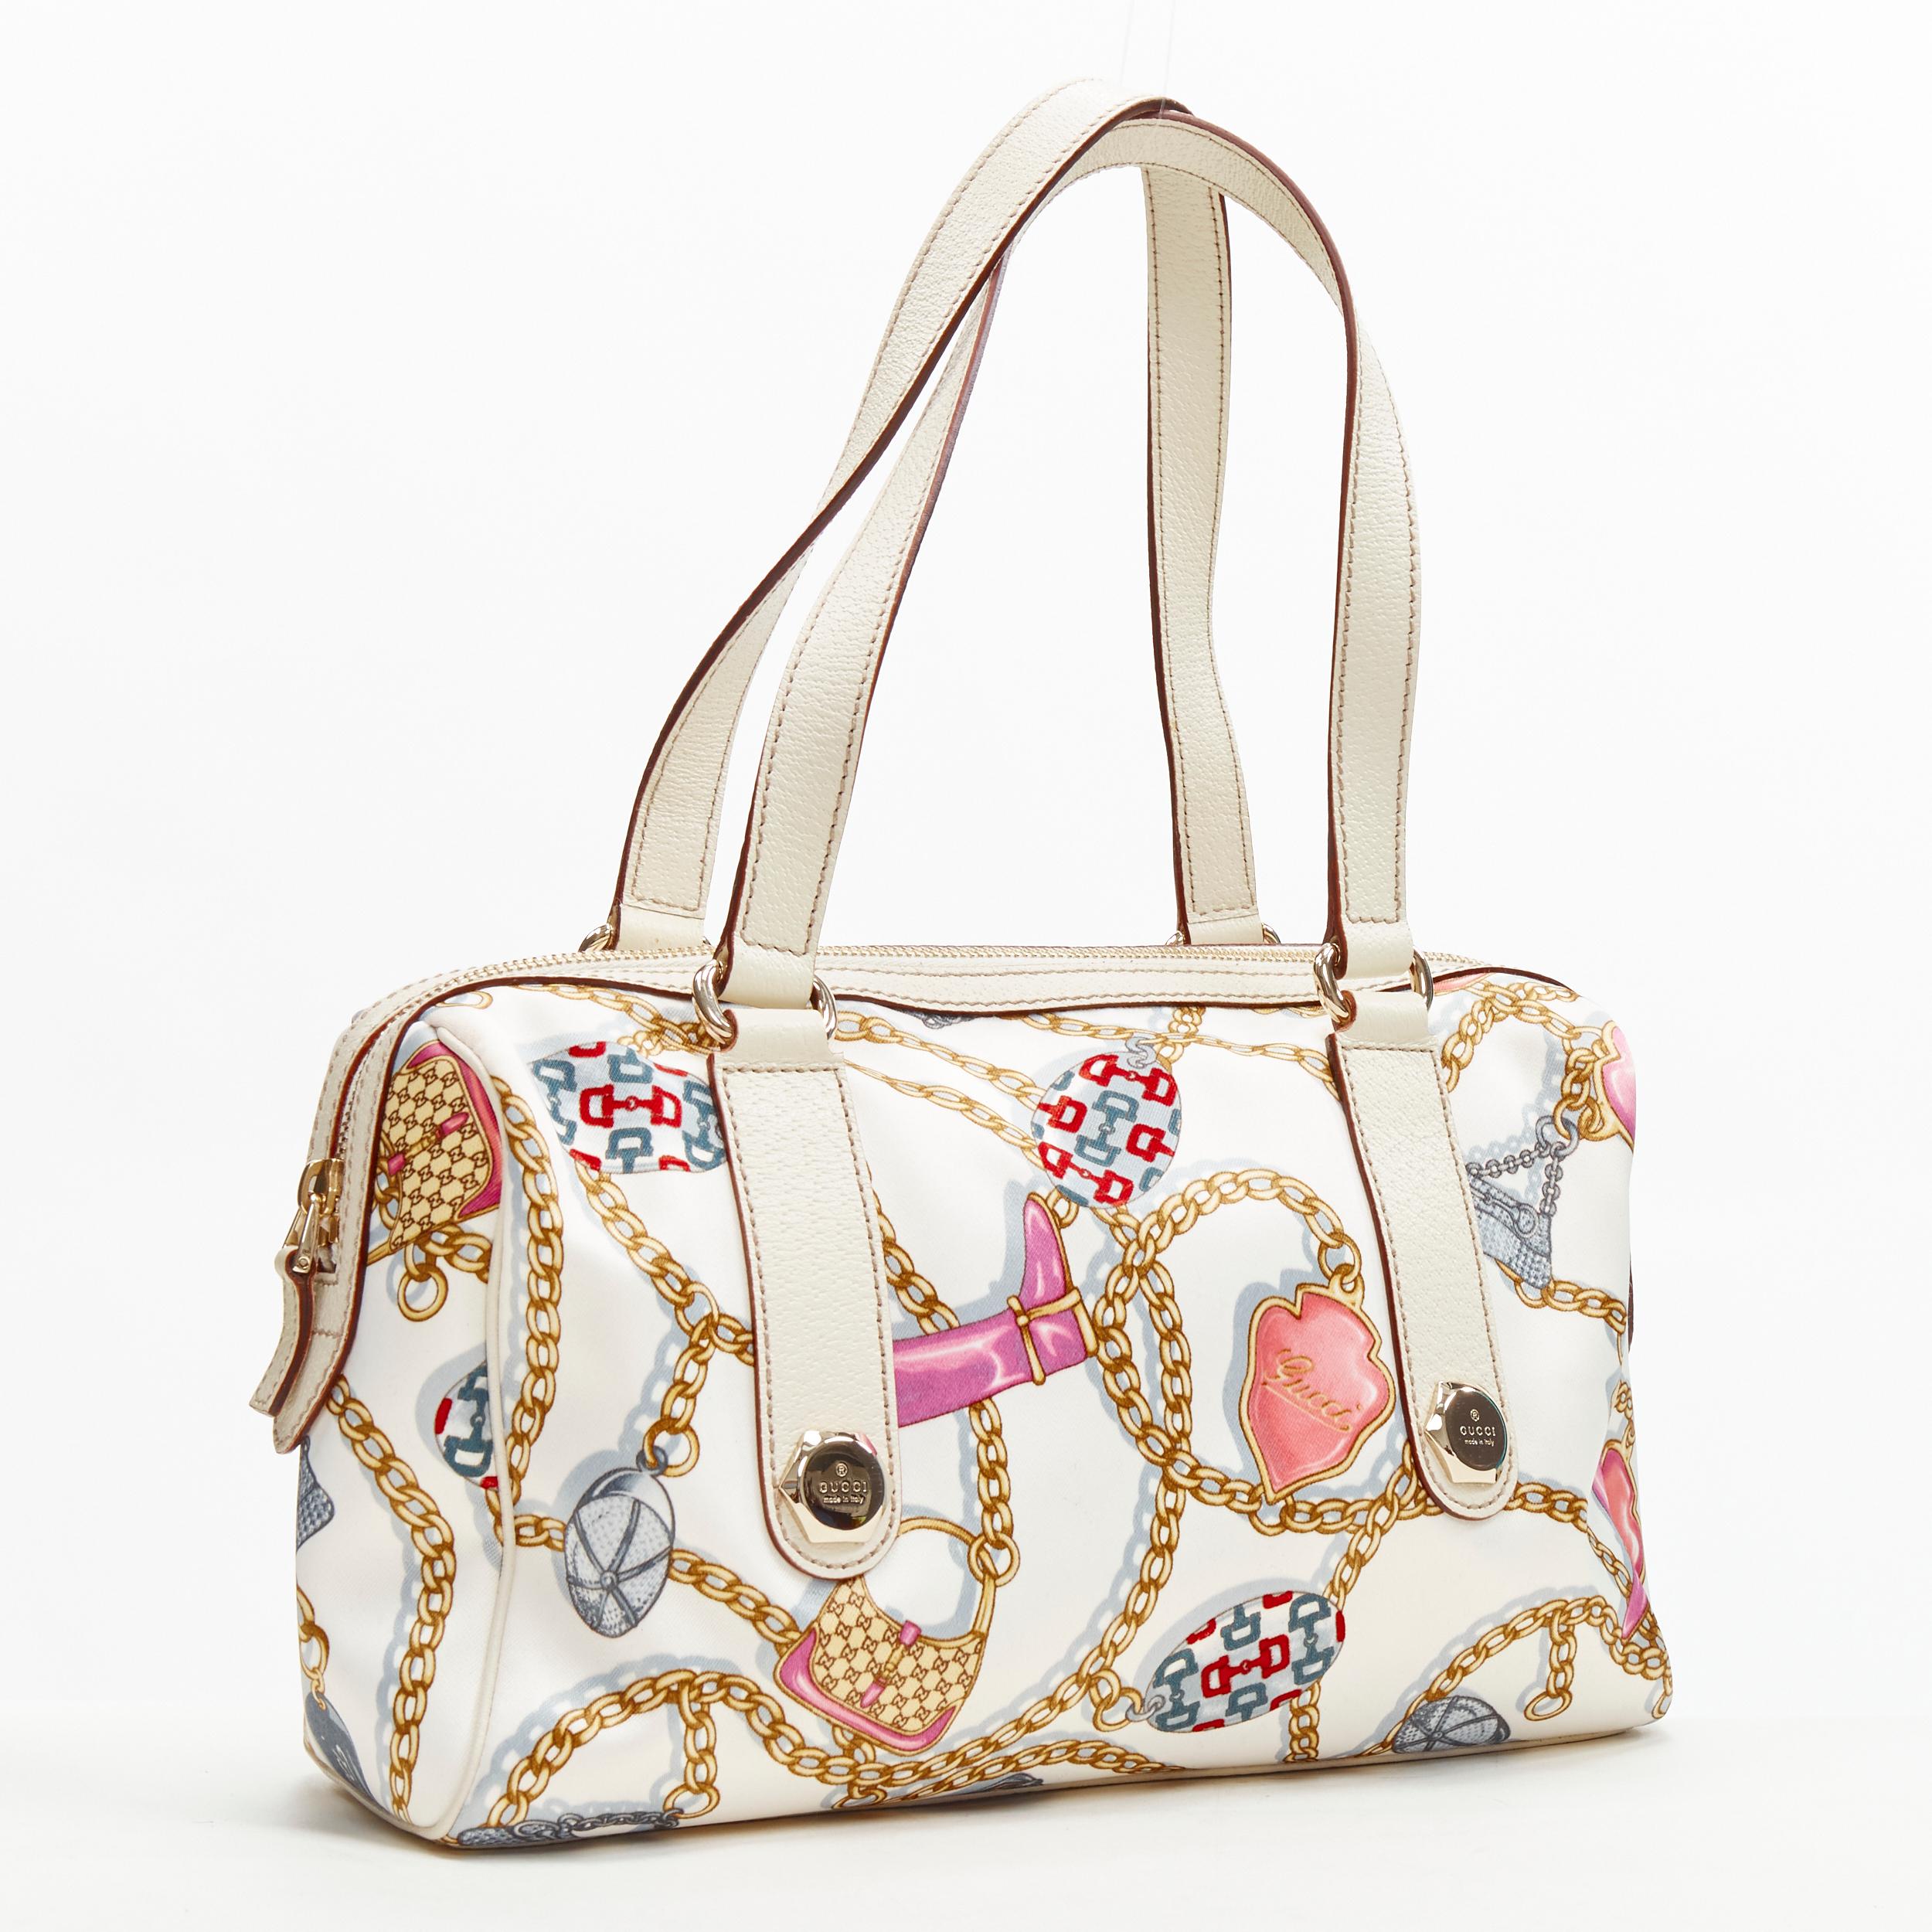 GUCCI Y2K white Charmy chain print ecru leather small Boston bag
Brand: Gucci
Model: 152457 491403
Material: Silk
Color: Ecru
Pattern: Abstract
Closure: Zip
Extra Detail: Charmy gold chain with Gucci DNA print on silk. Ecru white leather trim. Top